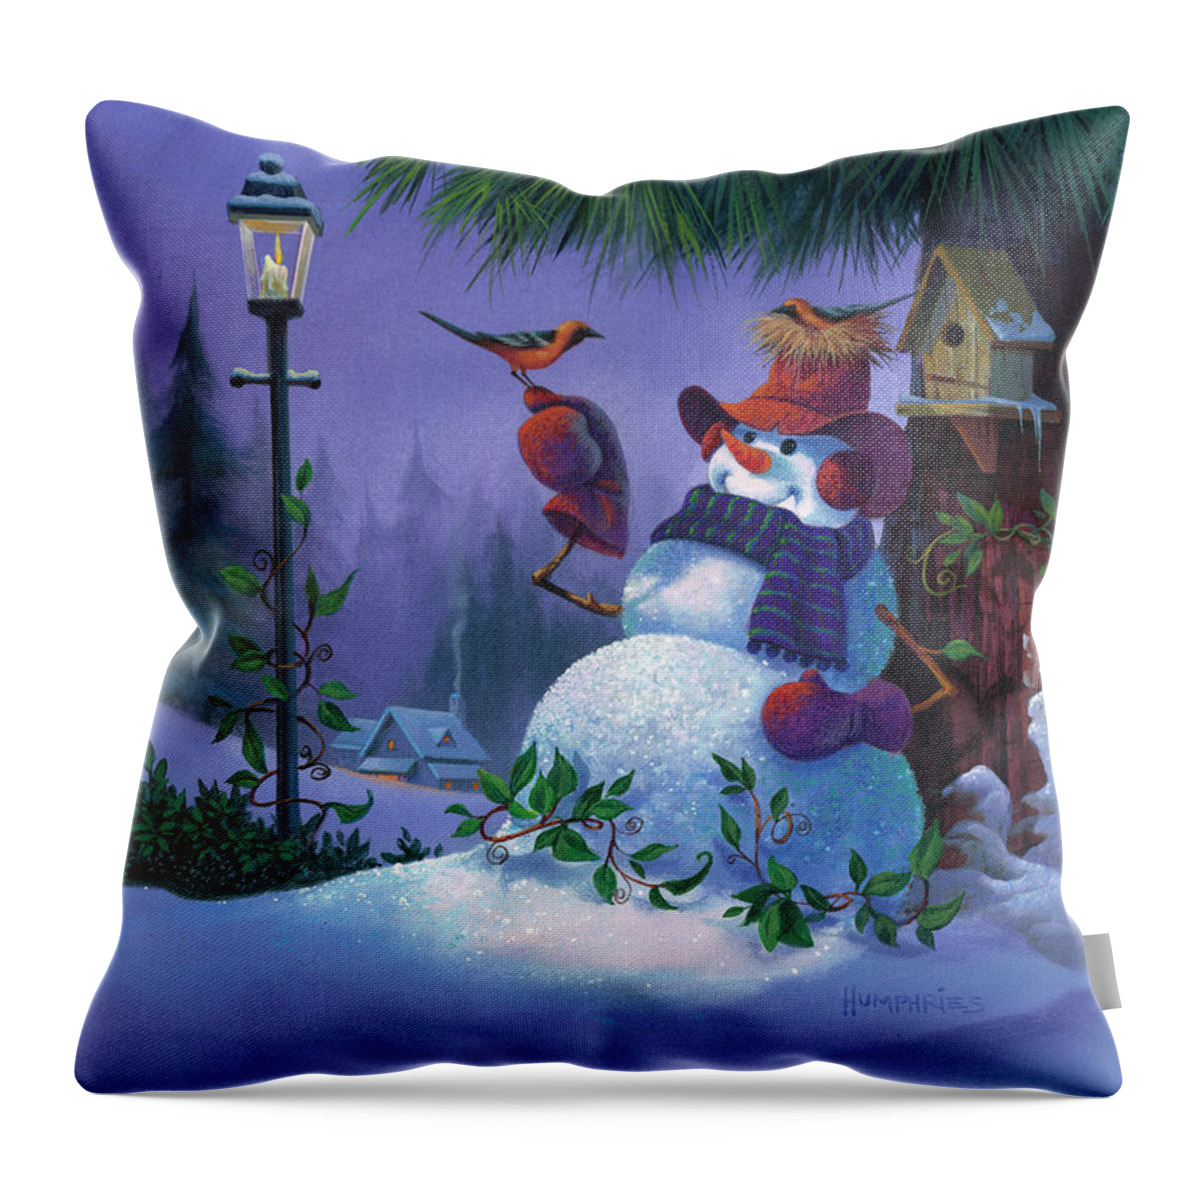 Michael Humphries Throw Pillow featuring the painting Tweet Dreams by Michael Humphries